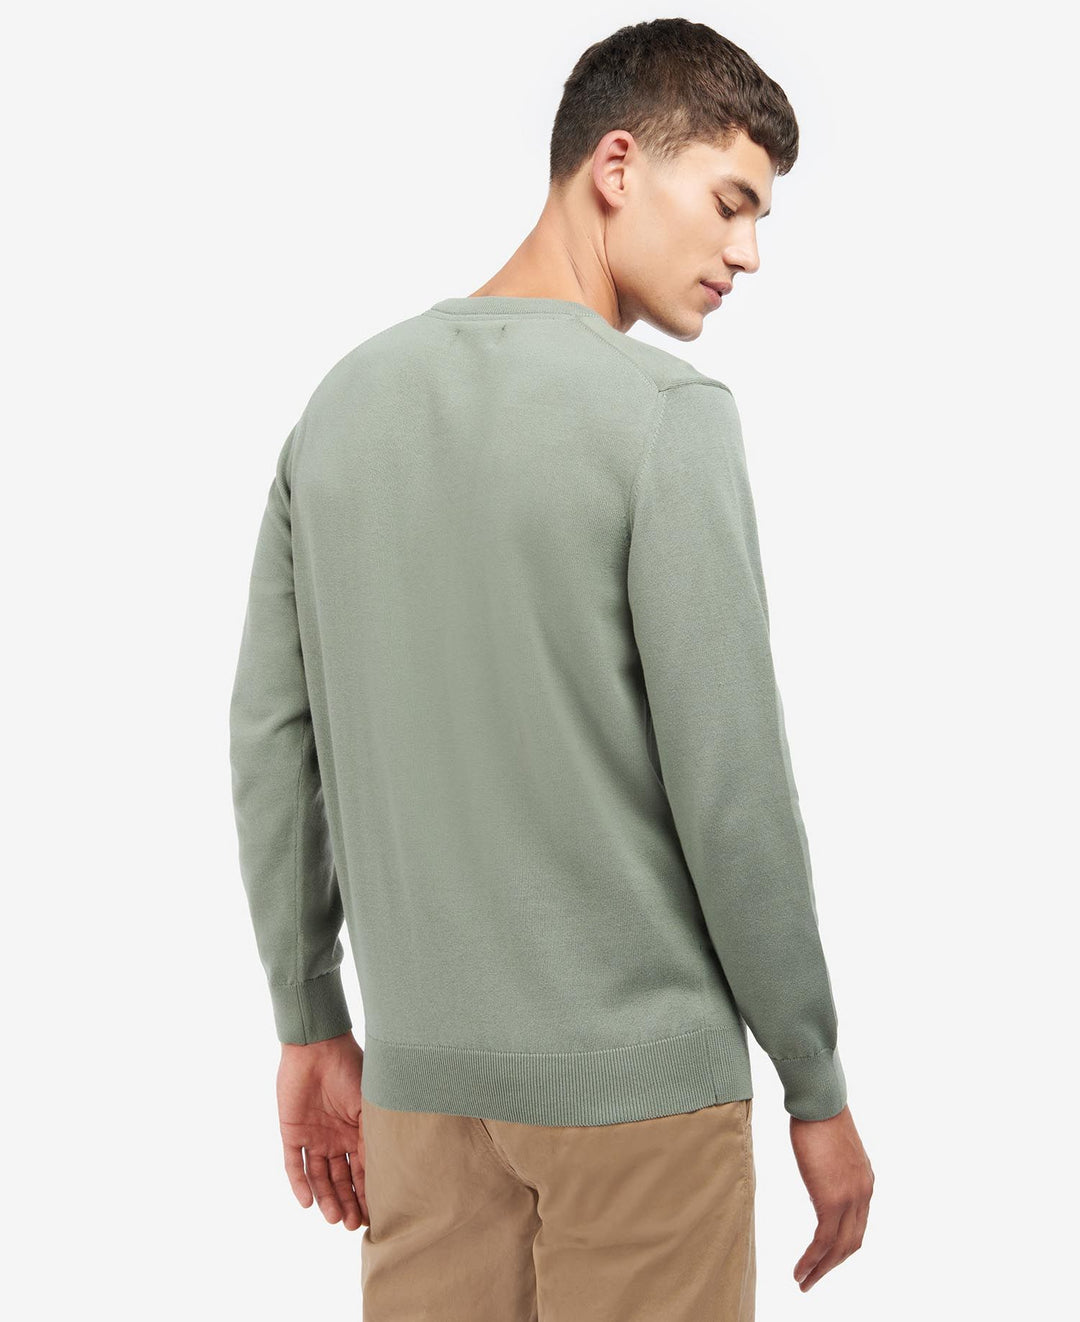 BARBOUR PIMA COTTON CREW - AGAVE GREEN